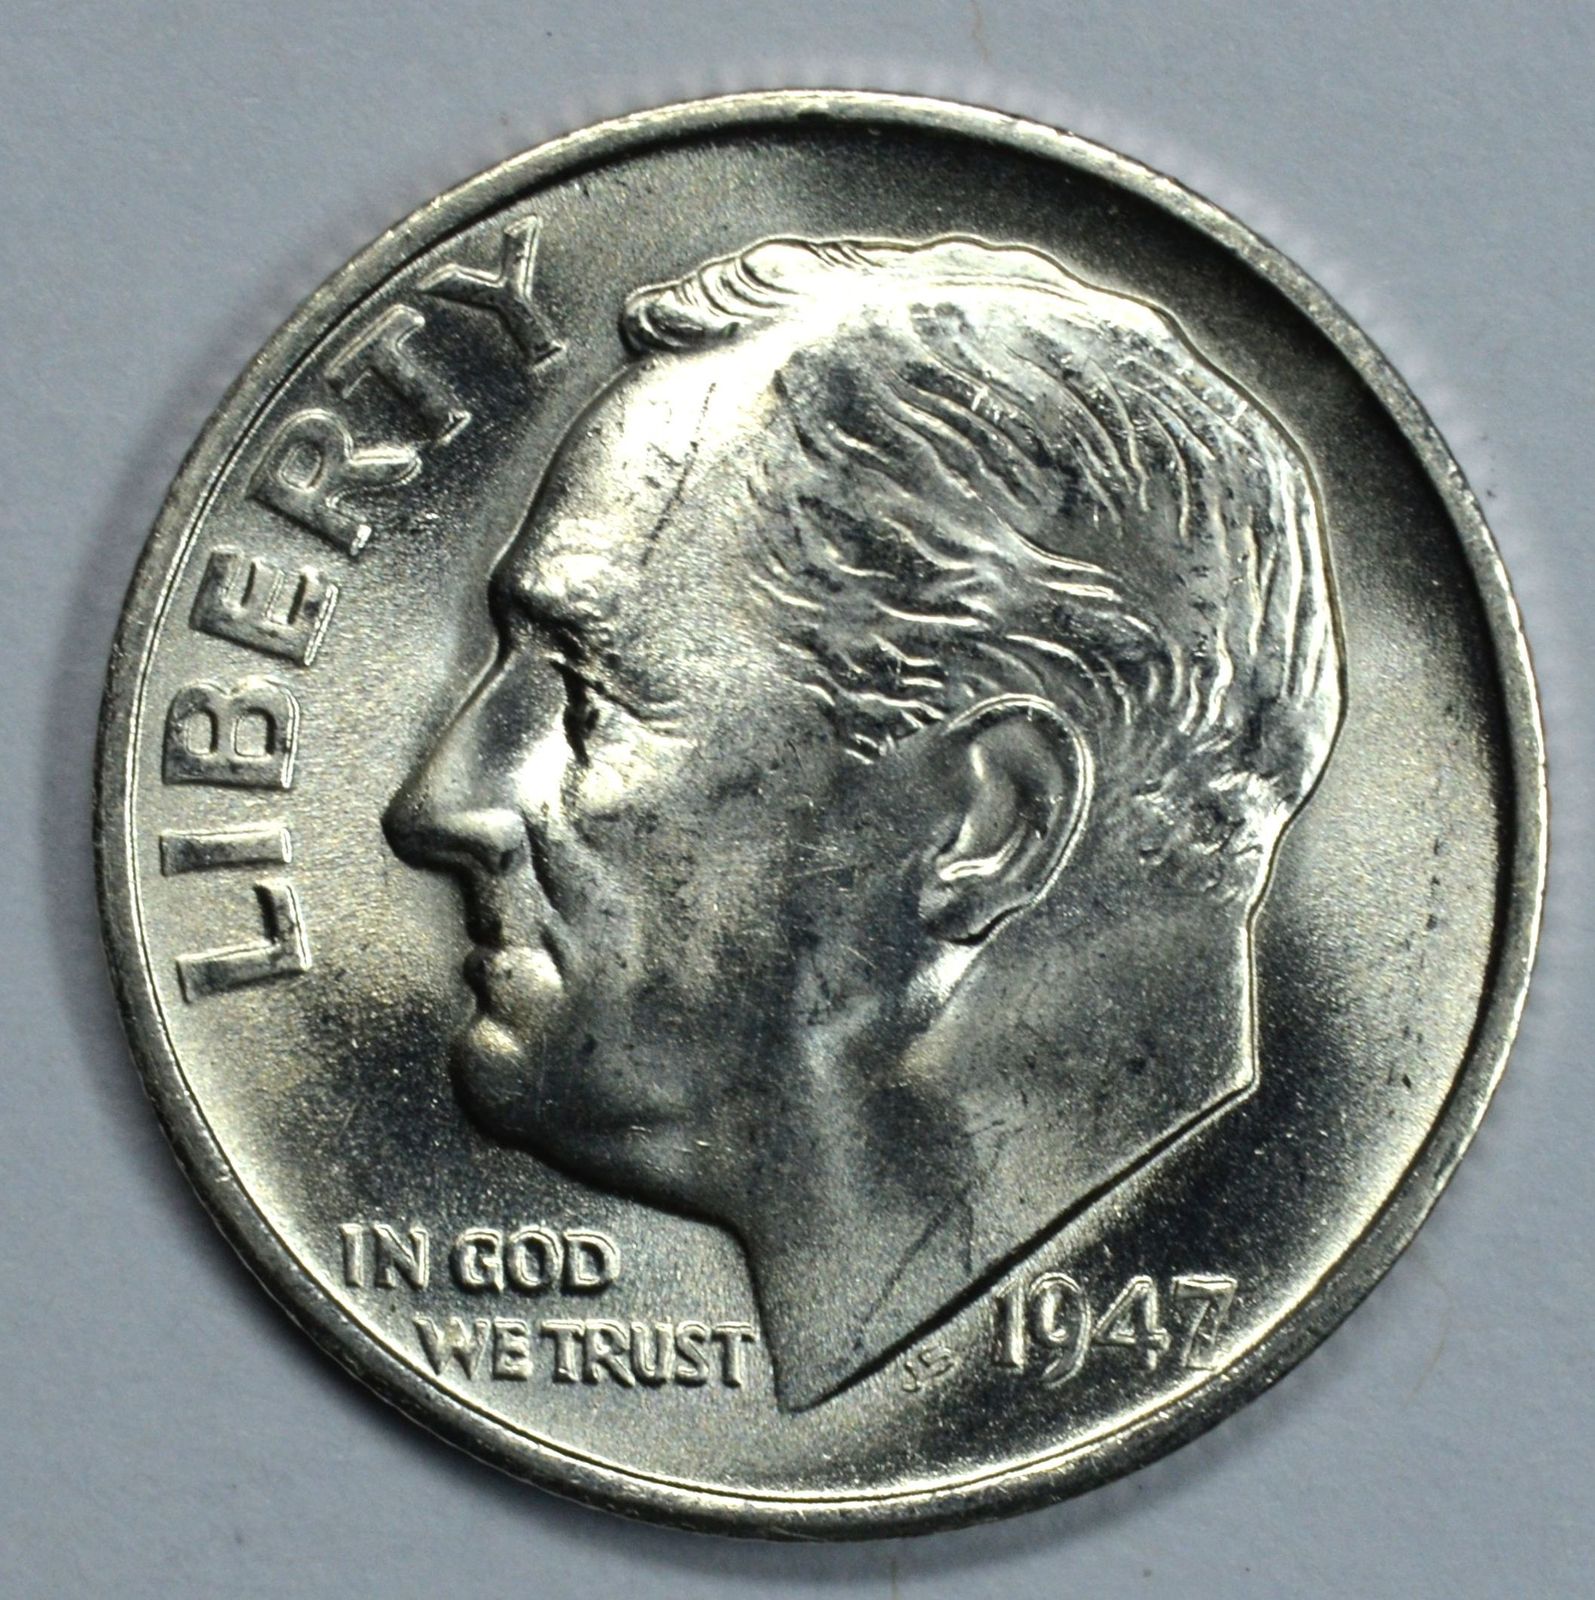 1947 S Roosevelt uncirculated silver dime BU  Full Bands - $18.00